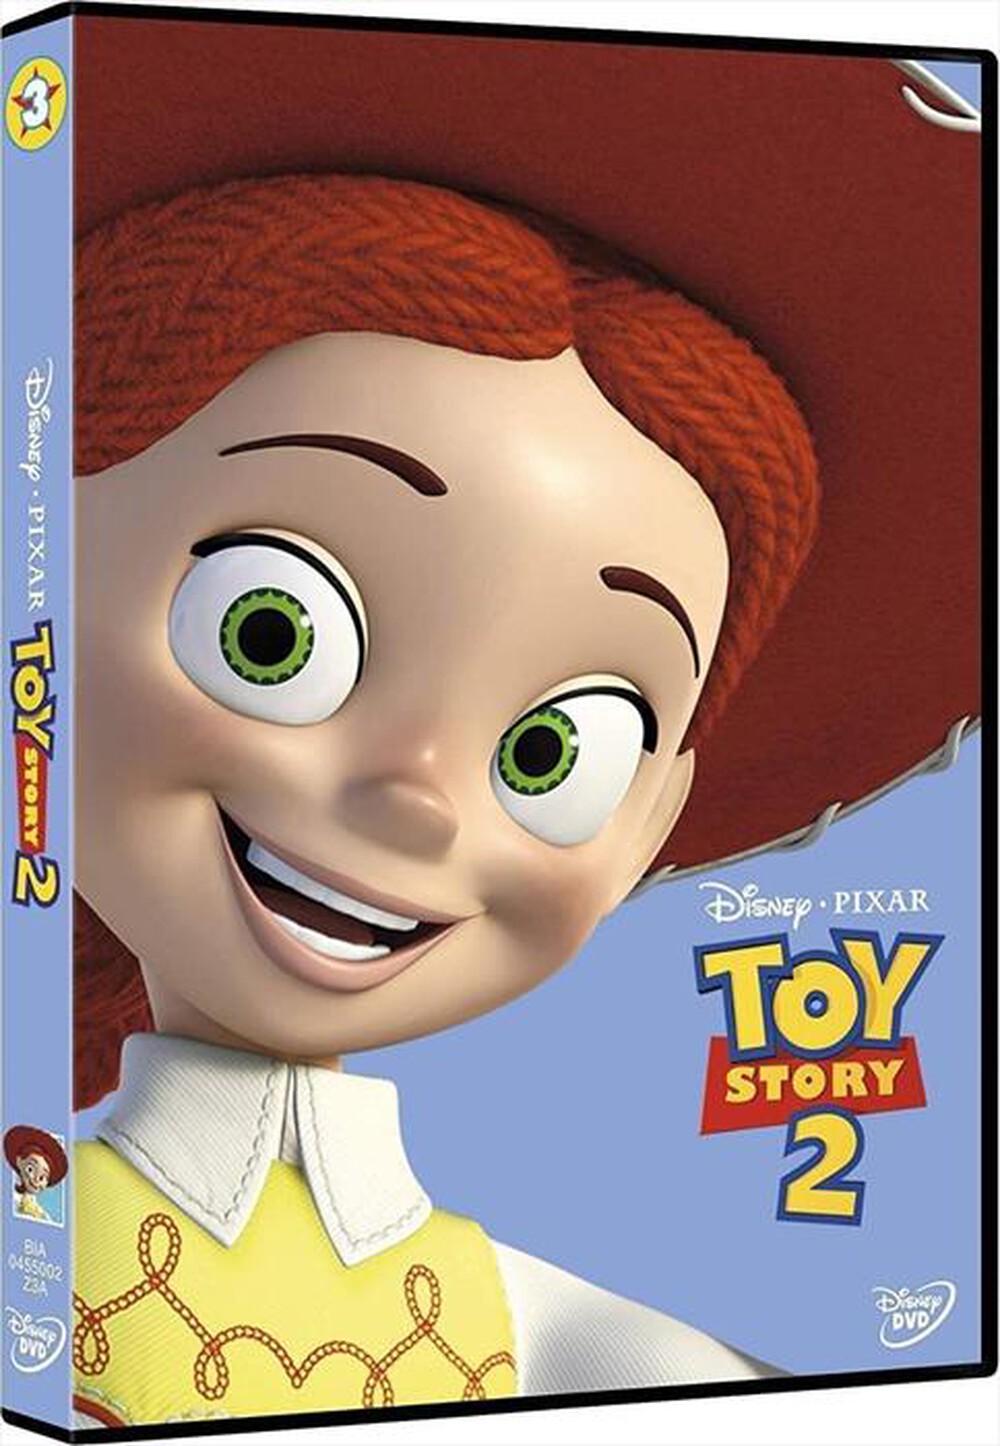 "EAGLE PICTURES - Toy Story 2 (SE)"